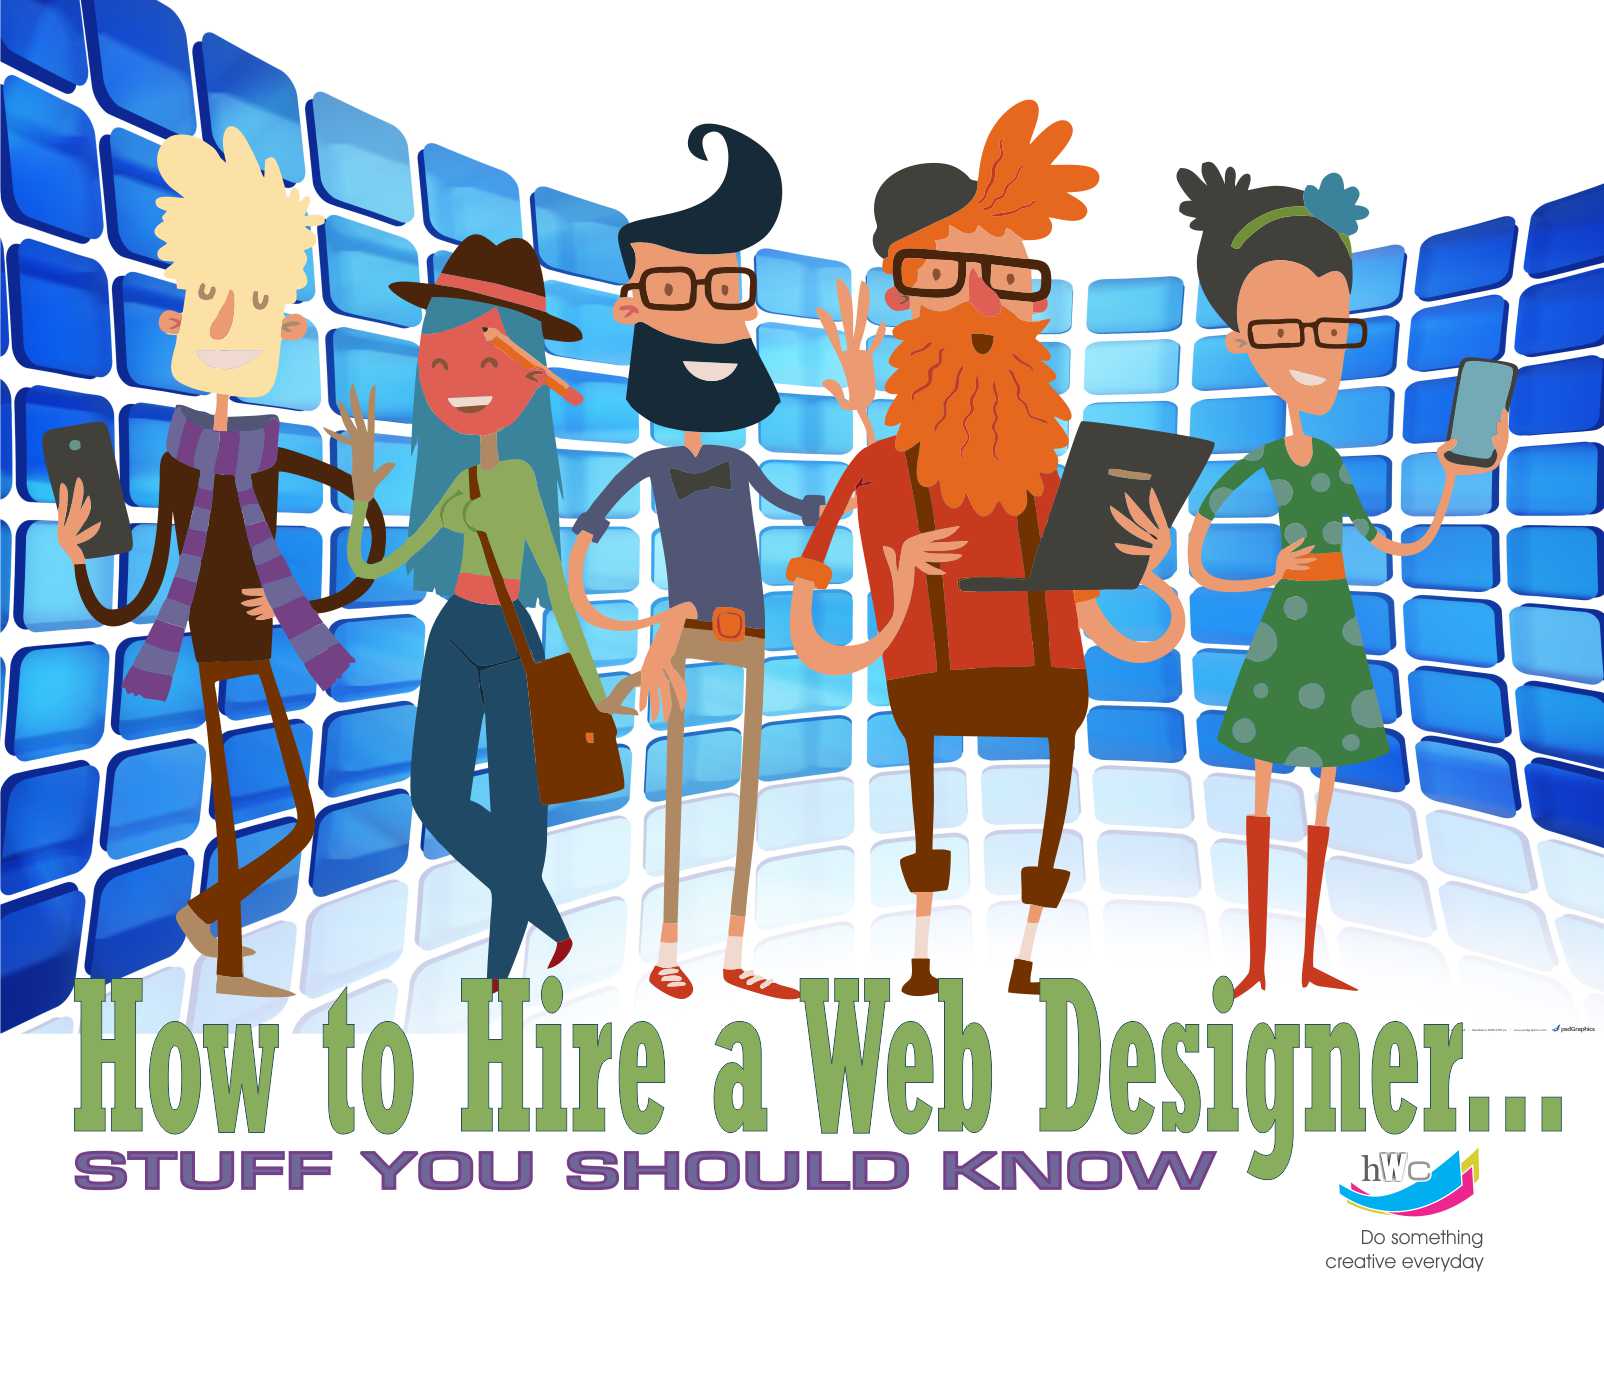 How to hire a web designer - Stuff you should know